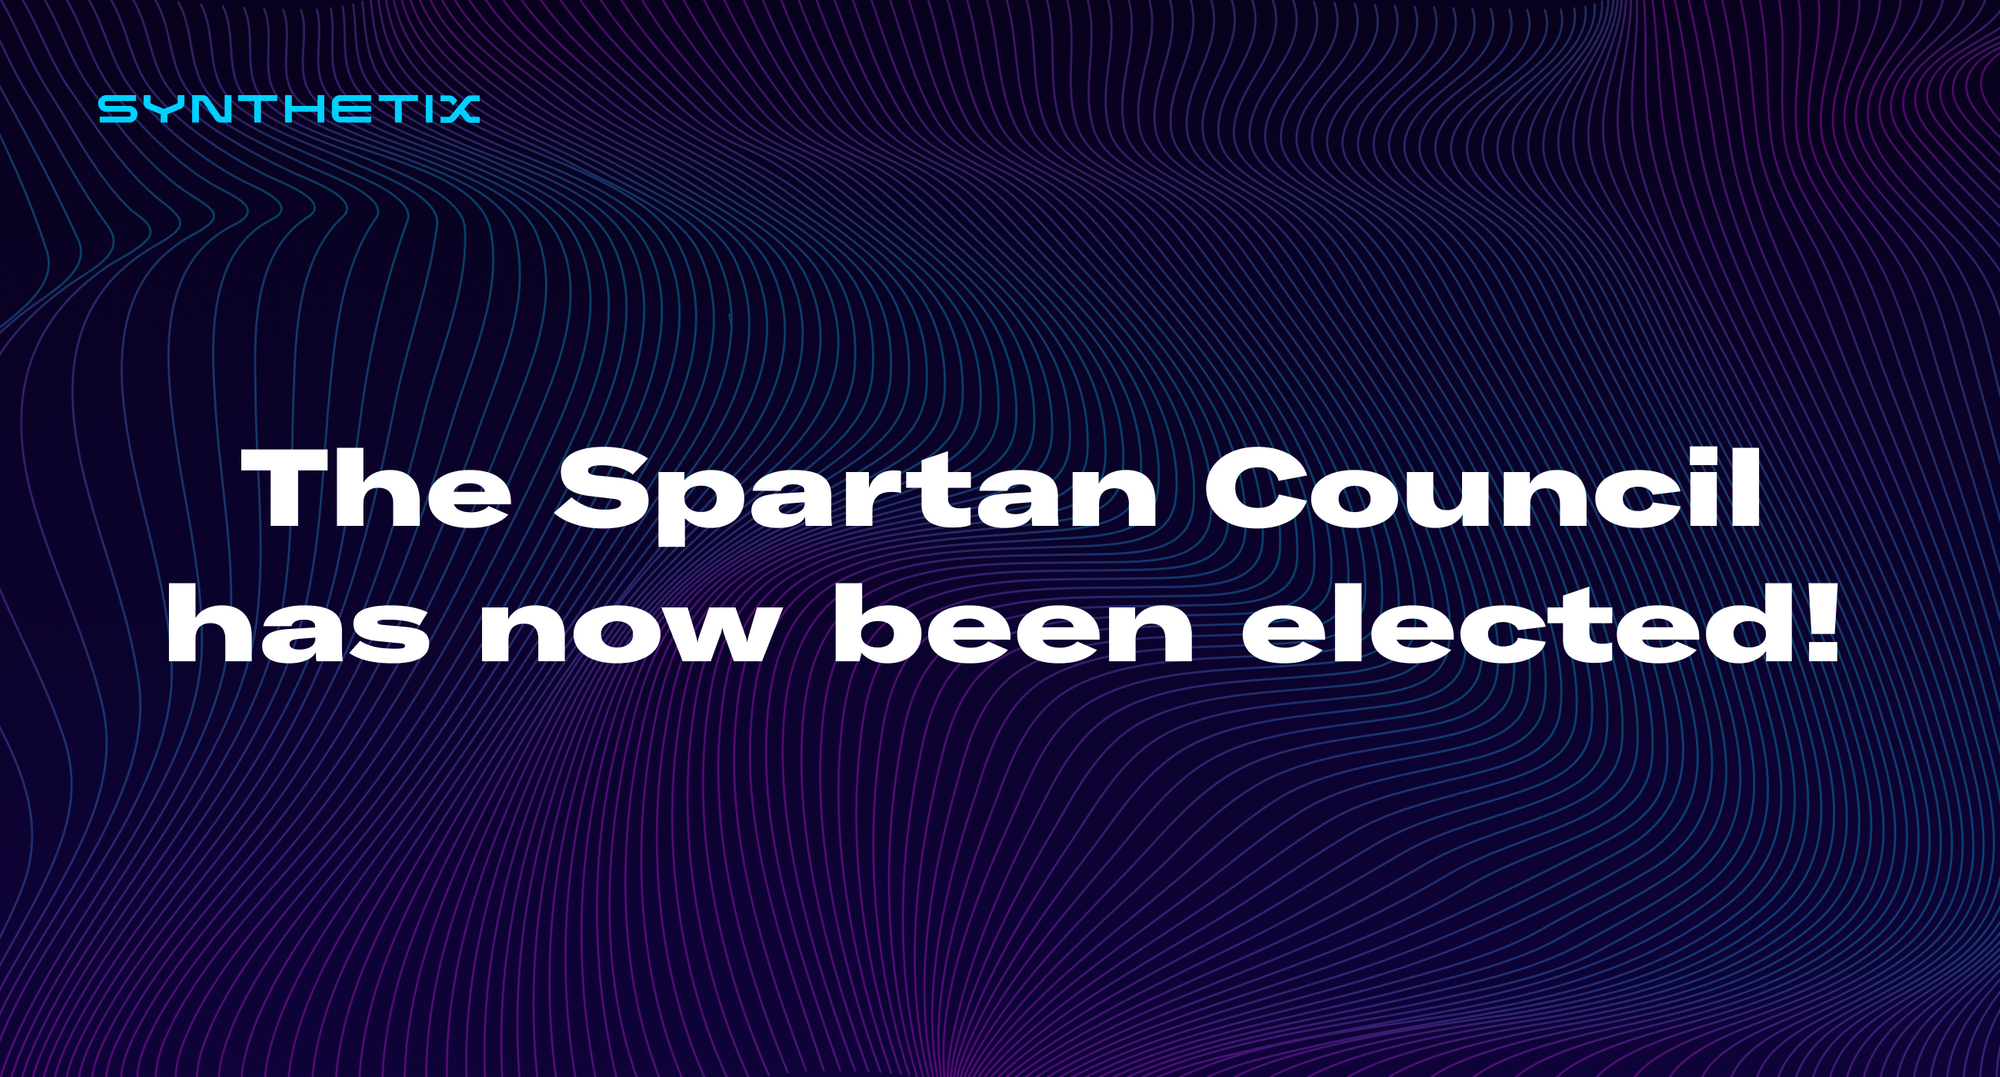 The Spartan Council has now been elected!